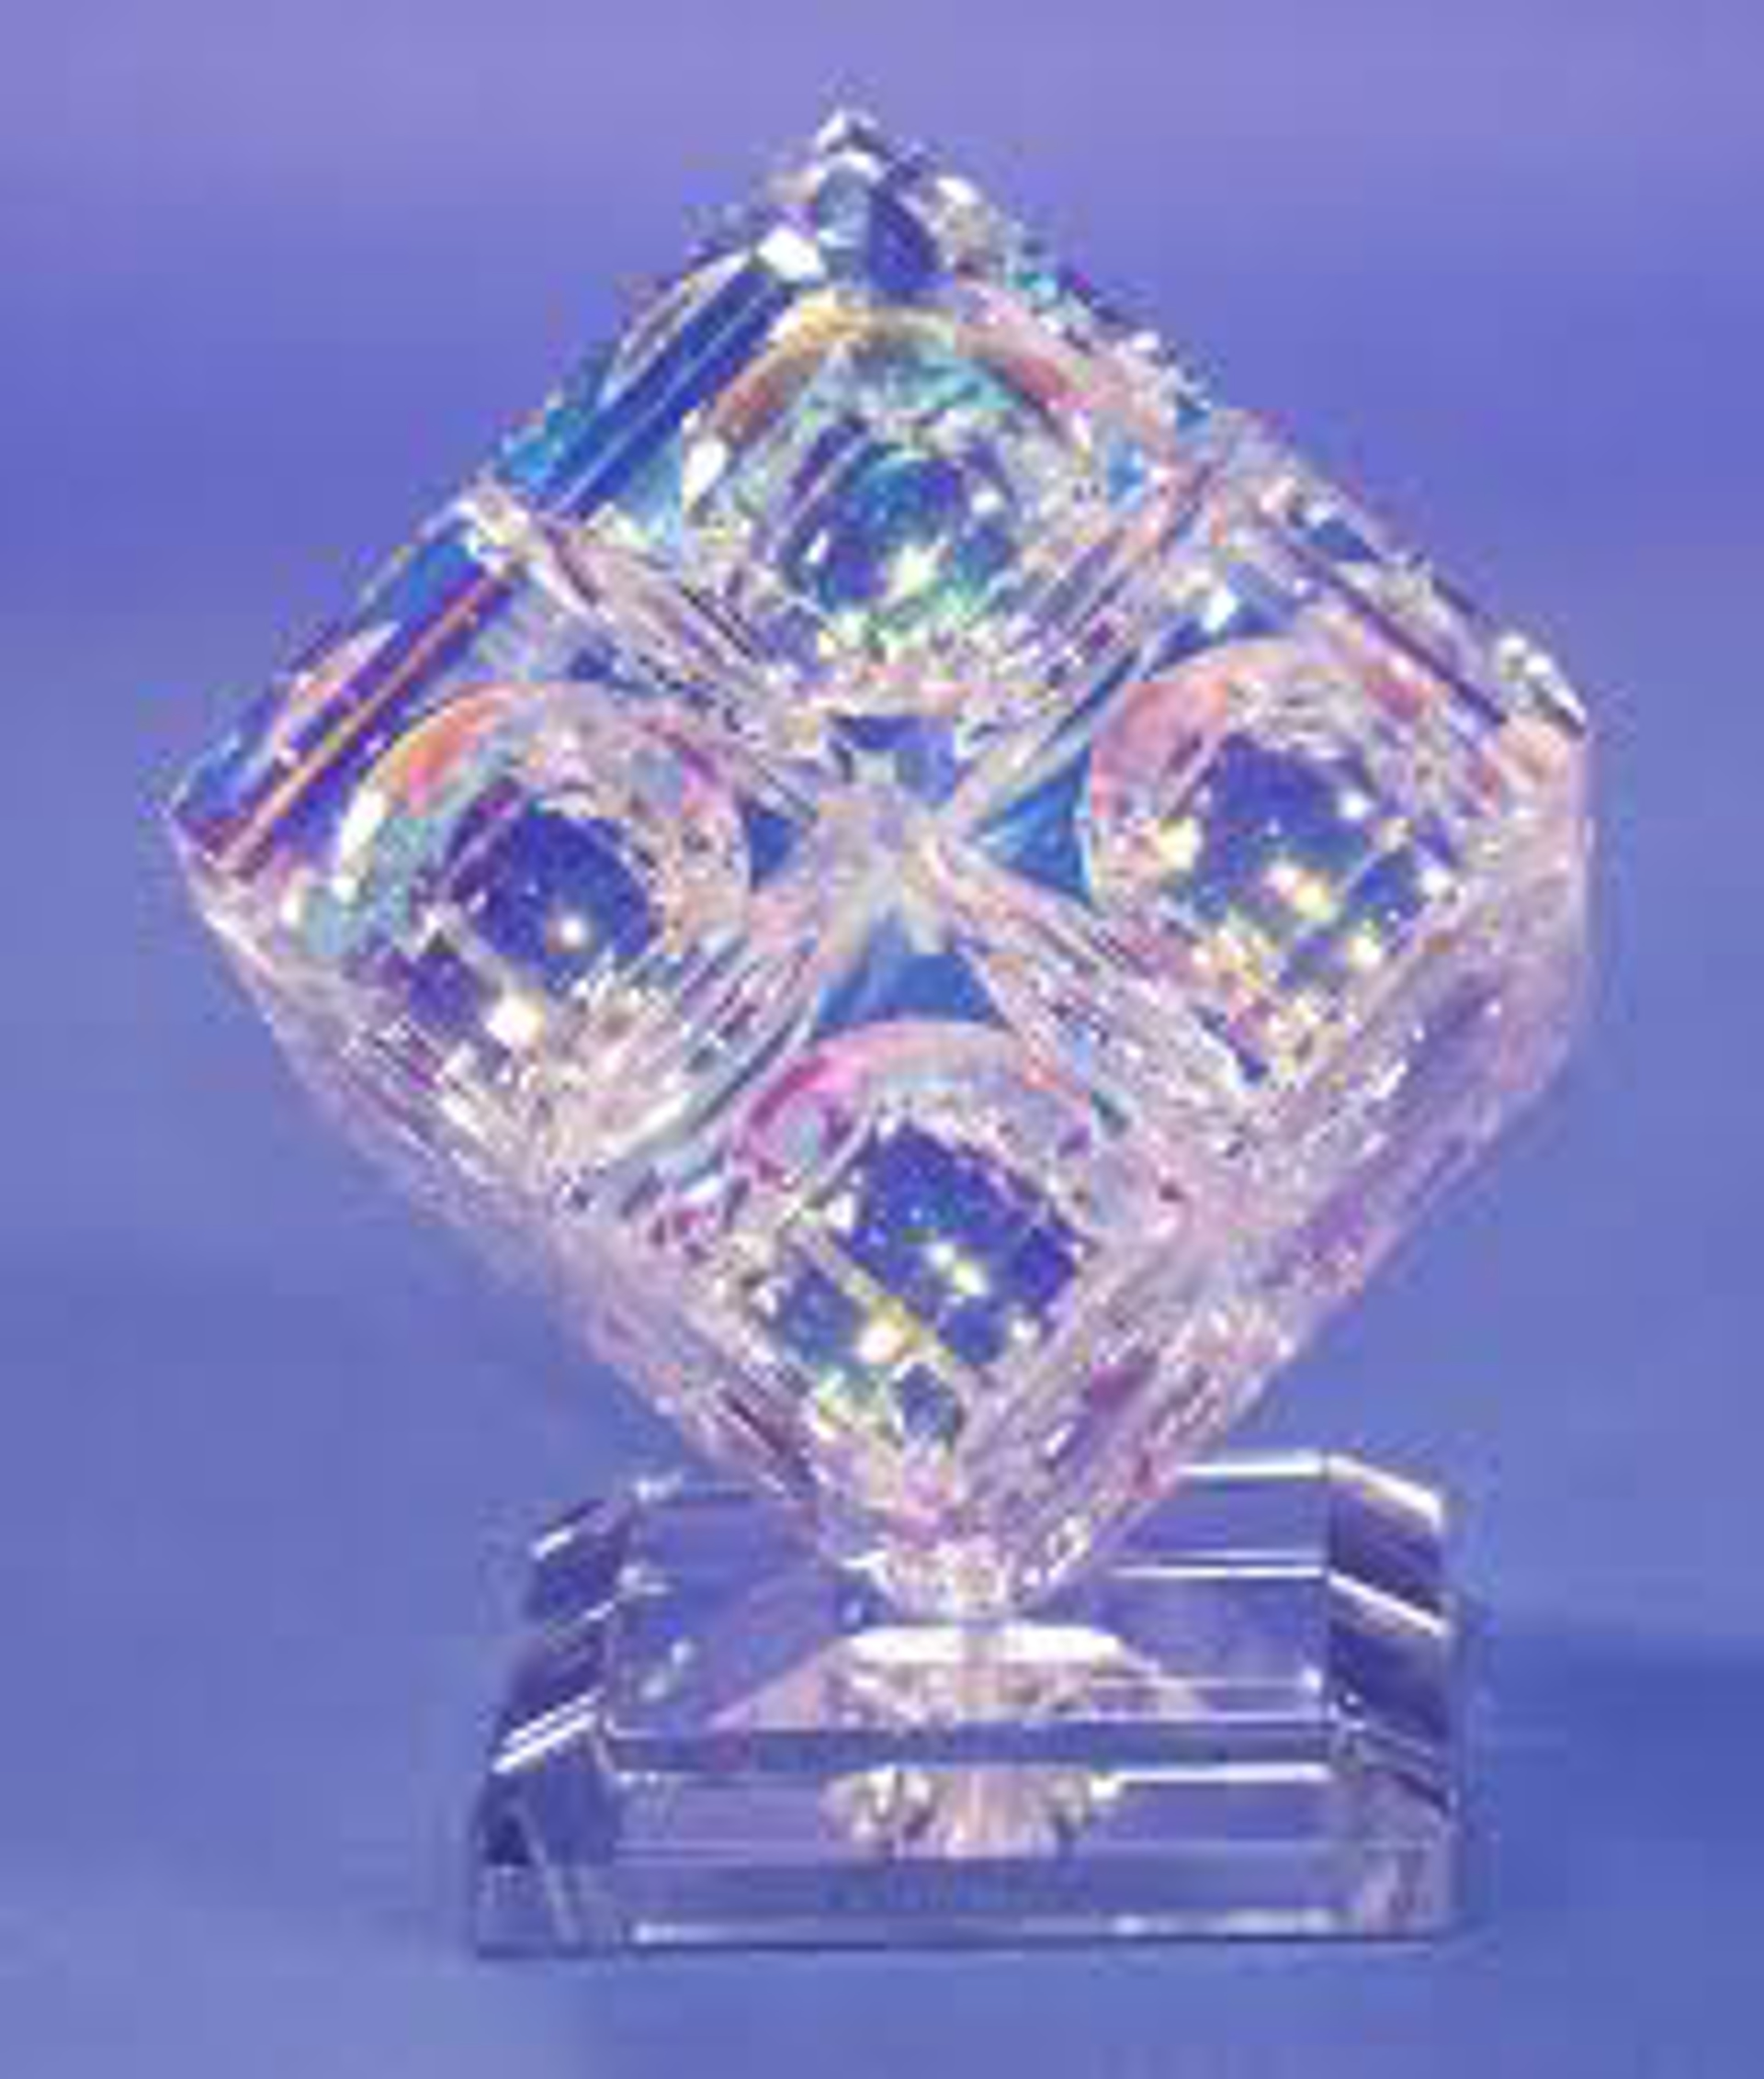 Crystal Dichroic Glass 8-40mm cubes in 1 cube on mirrored base by Harold Lustig